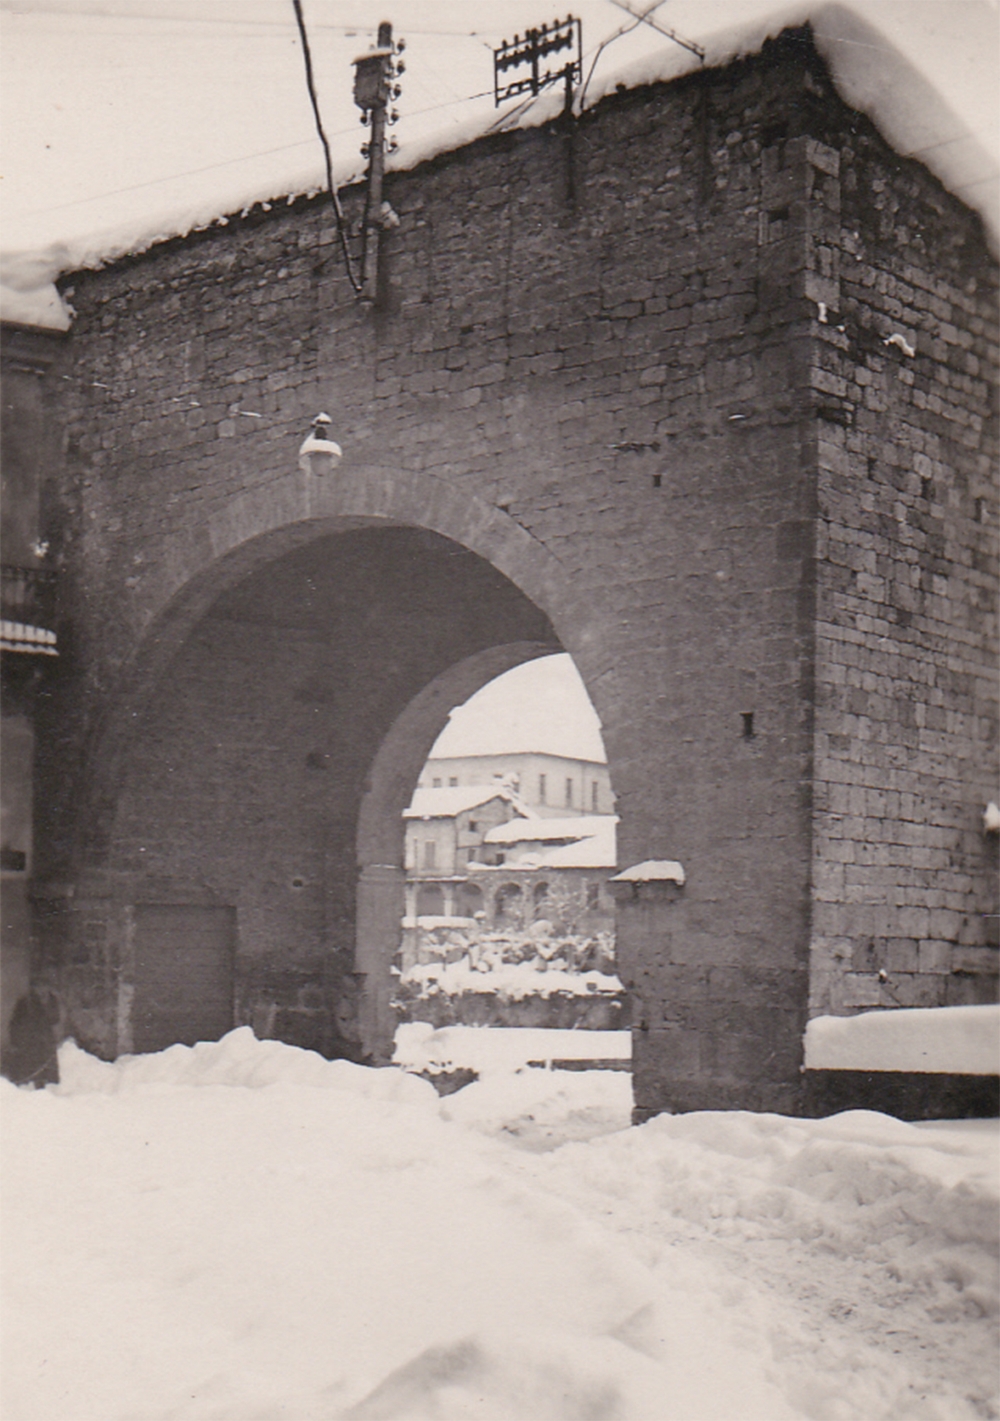 The “Great Snowfall” of 1929 in Ascoli – 3